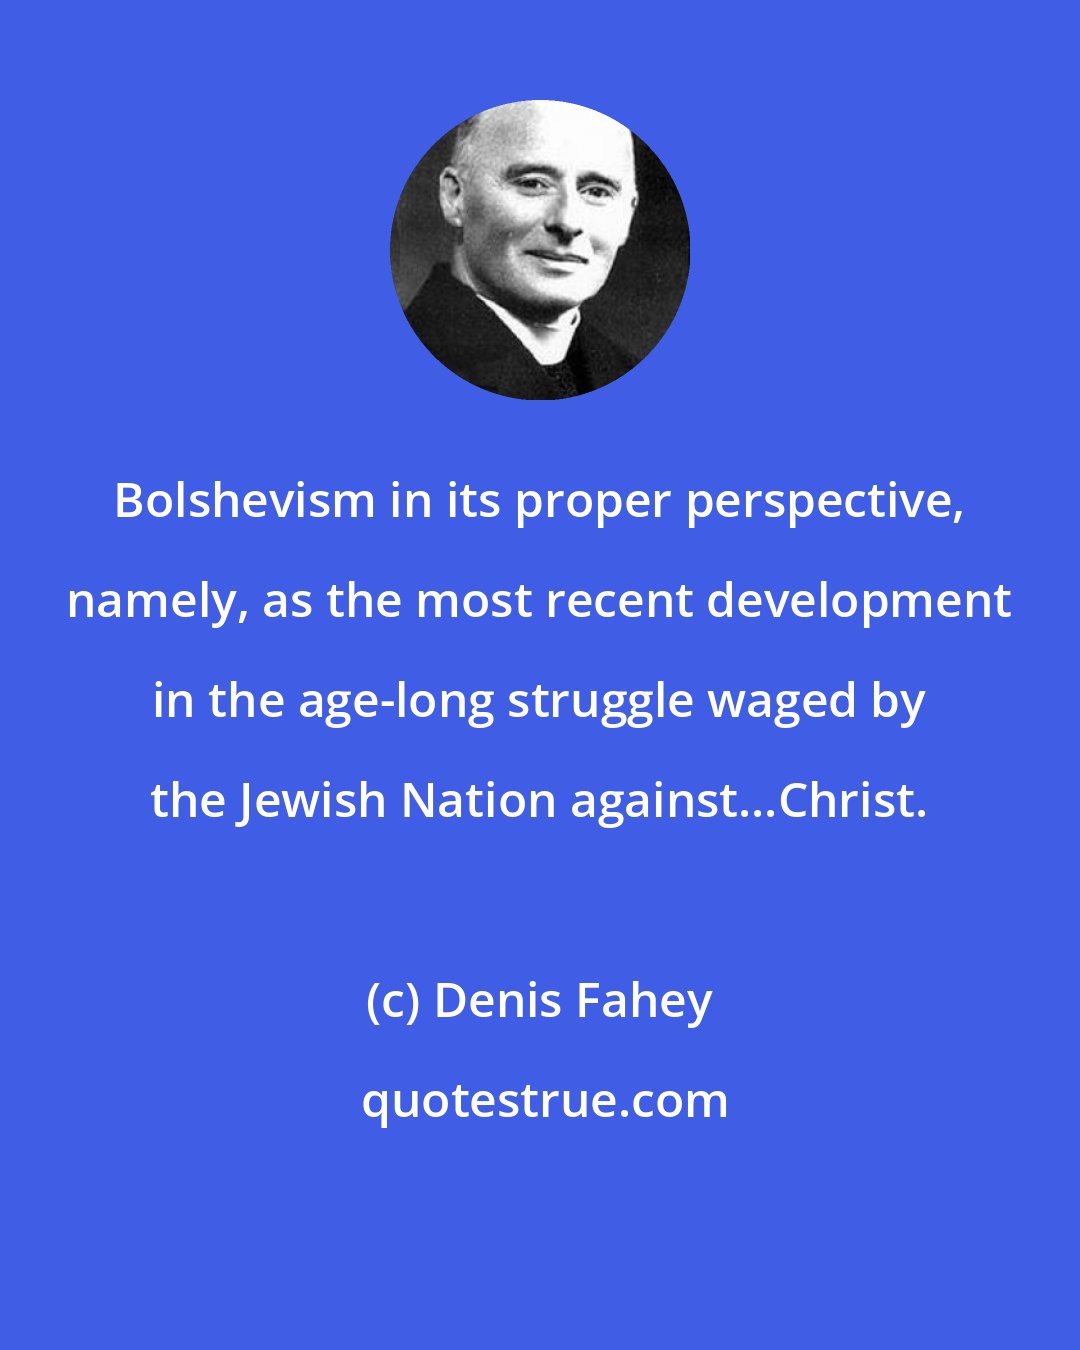 Denis Fahey: Bolshevism in its proper perspective, namely, as the most recent development in the age-long struggle waged by the Jewish Nation against...Christ.